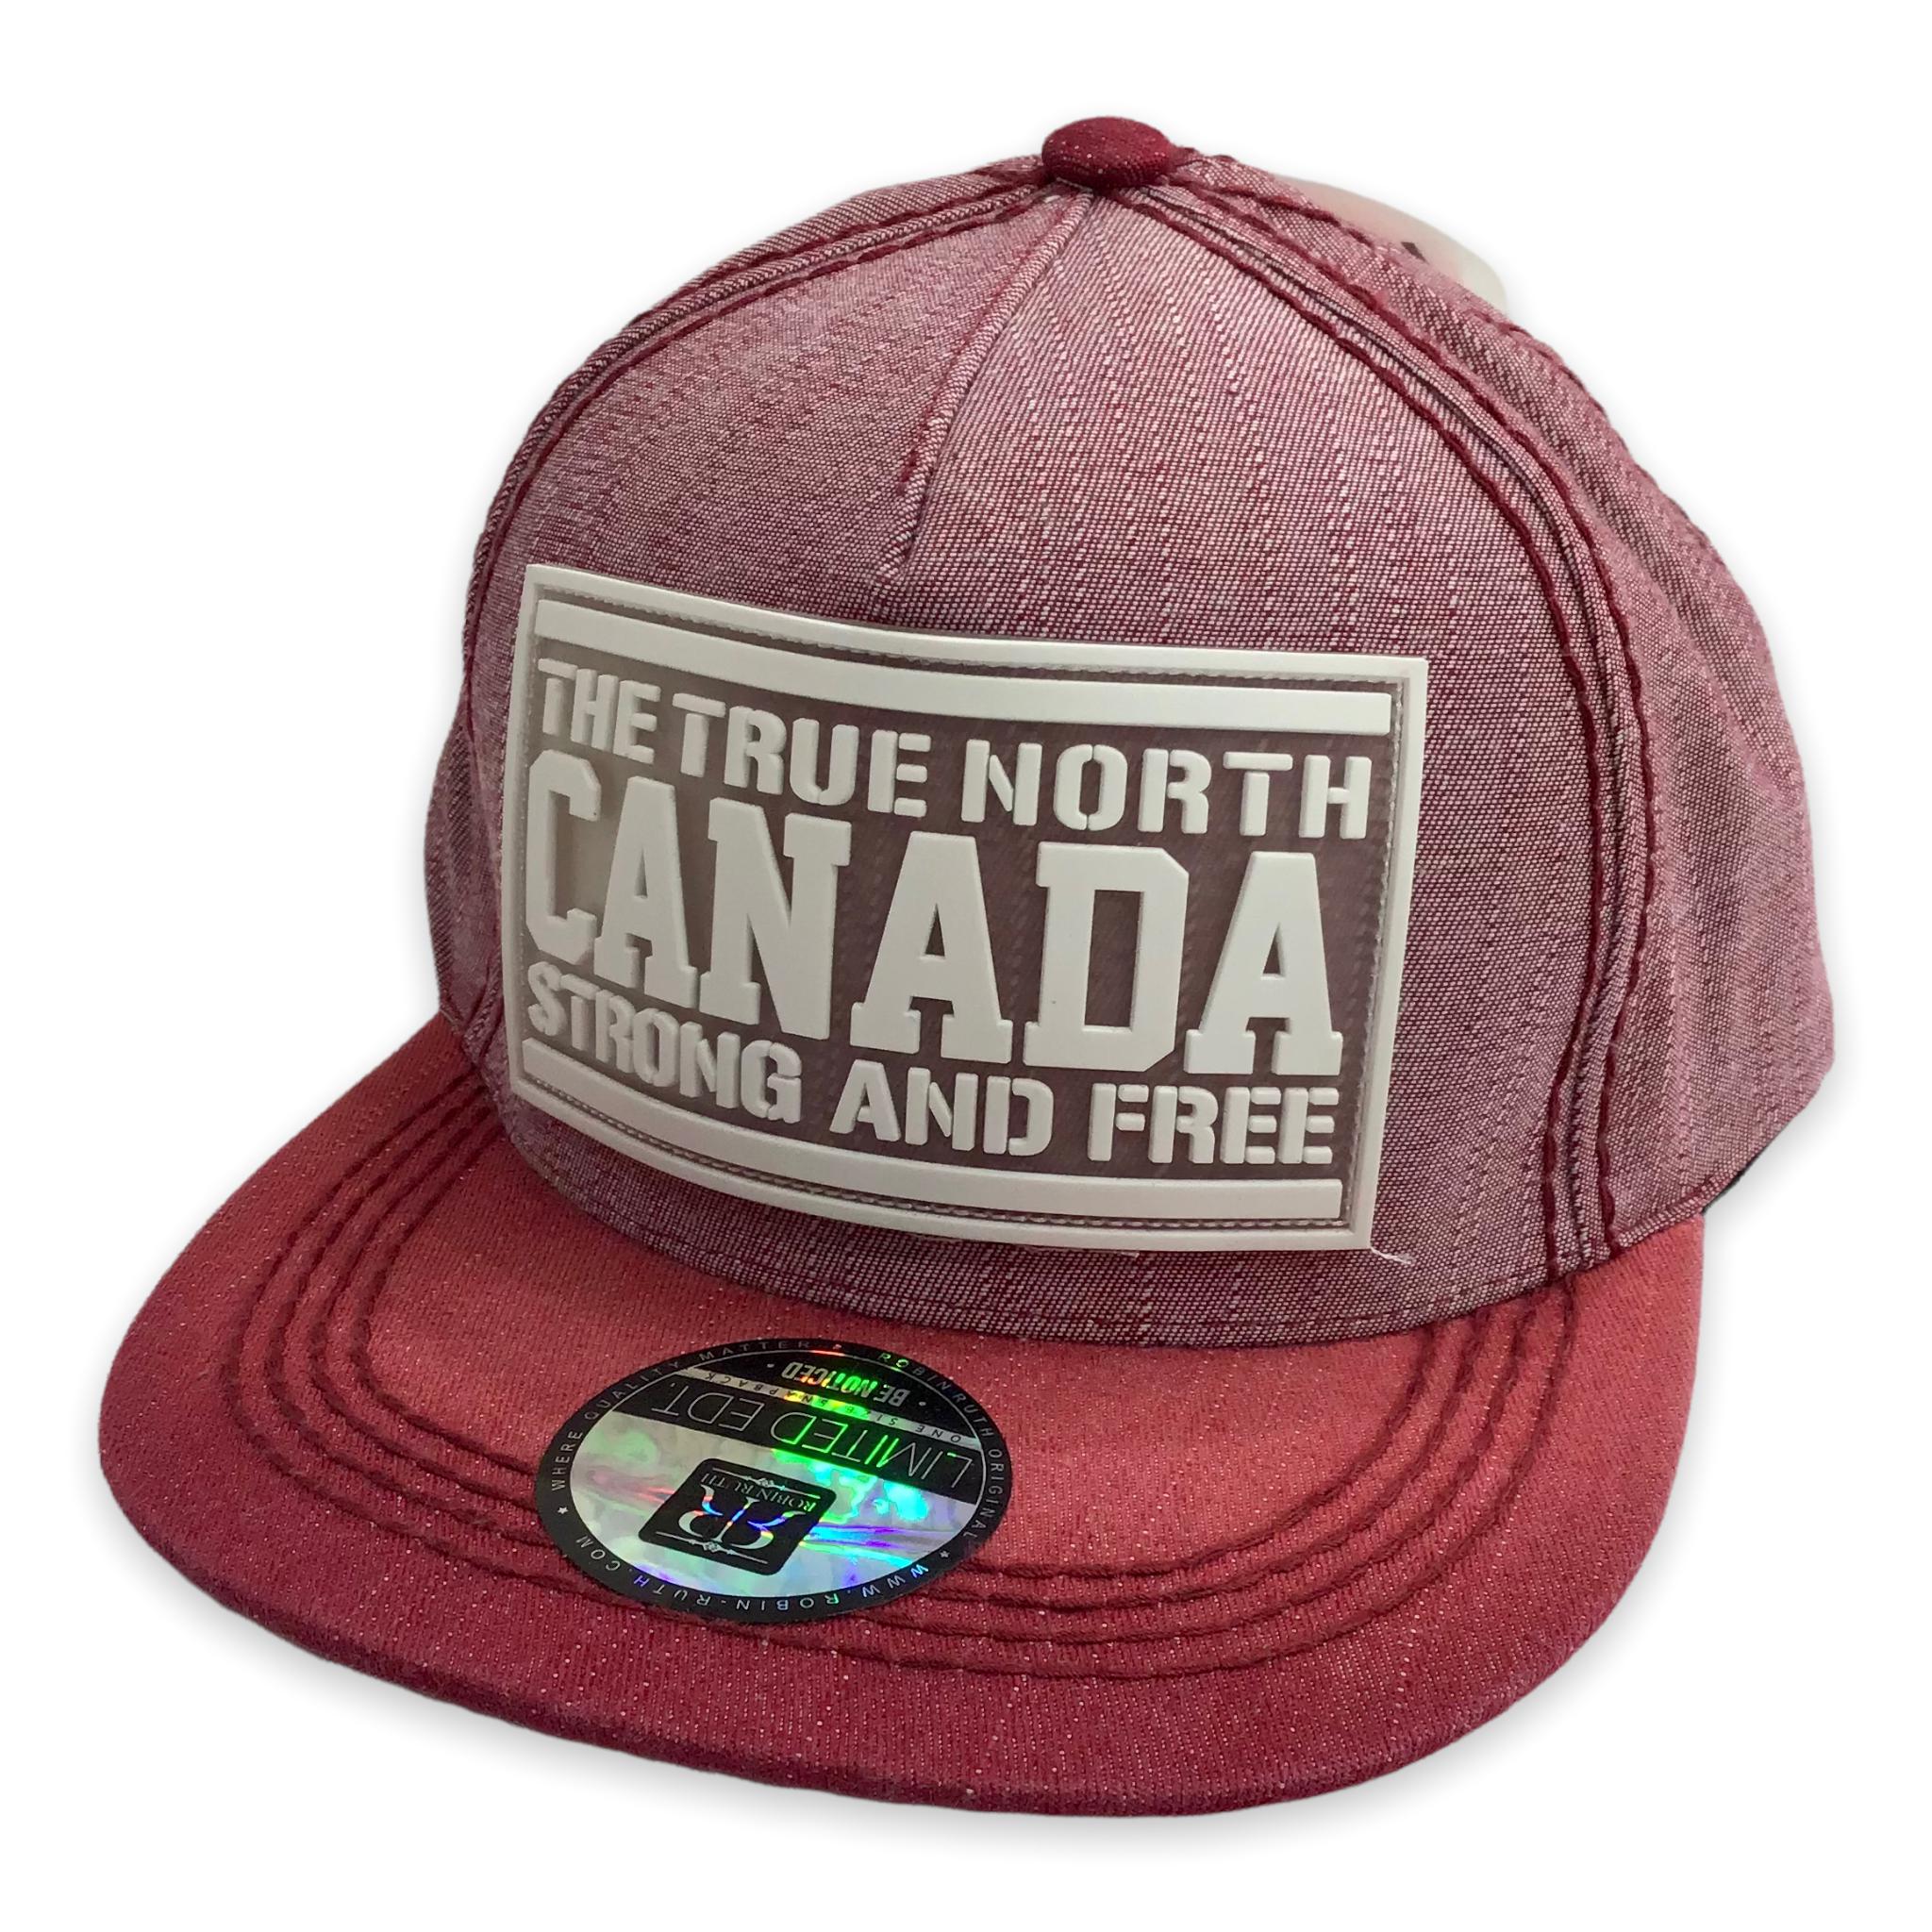 Canada Baseball Cap The True North Strong & Free Adjustable Hat